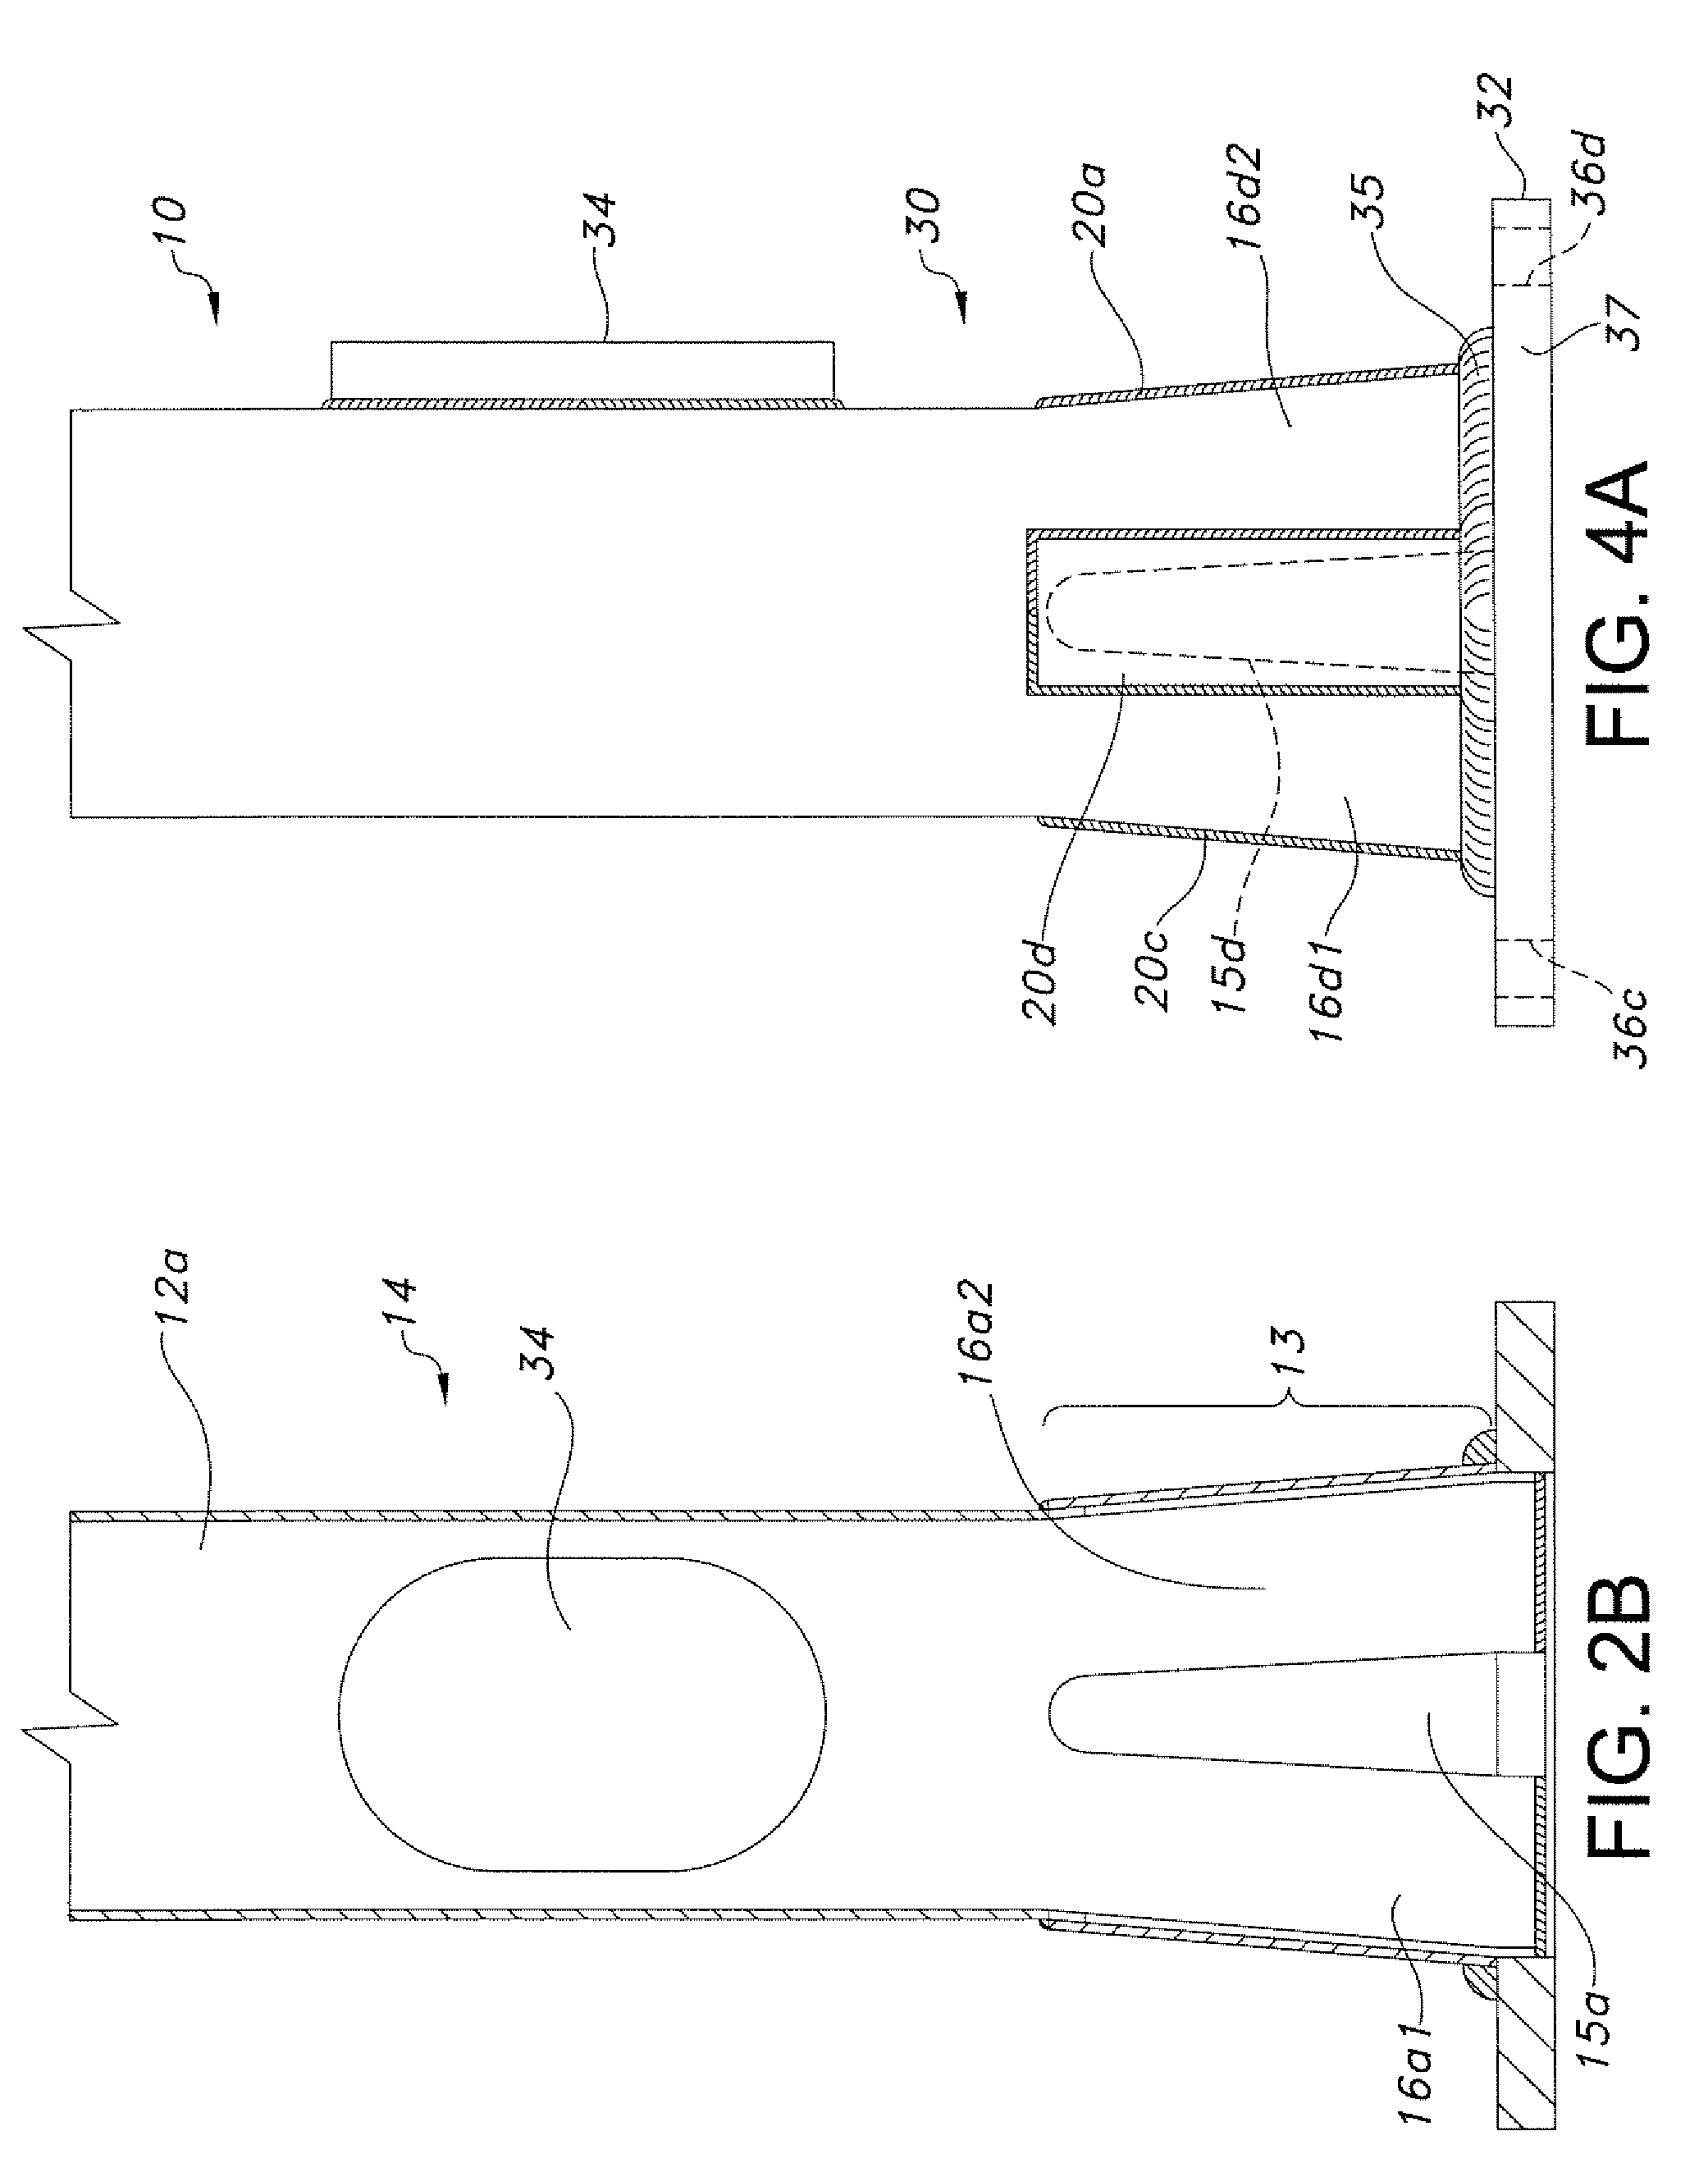 Method and apparatus for improving the strength of a utility pole